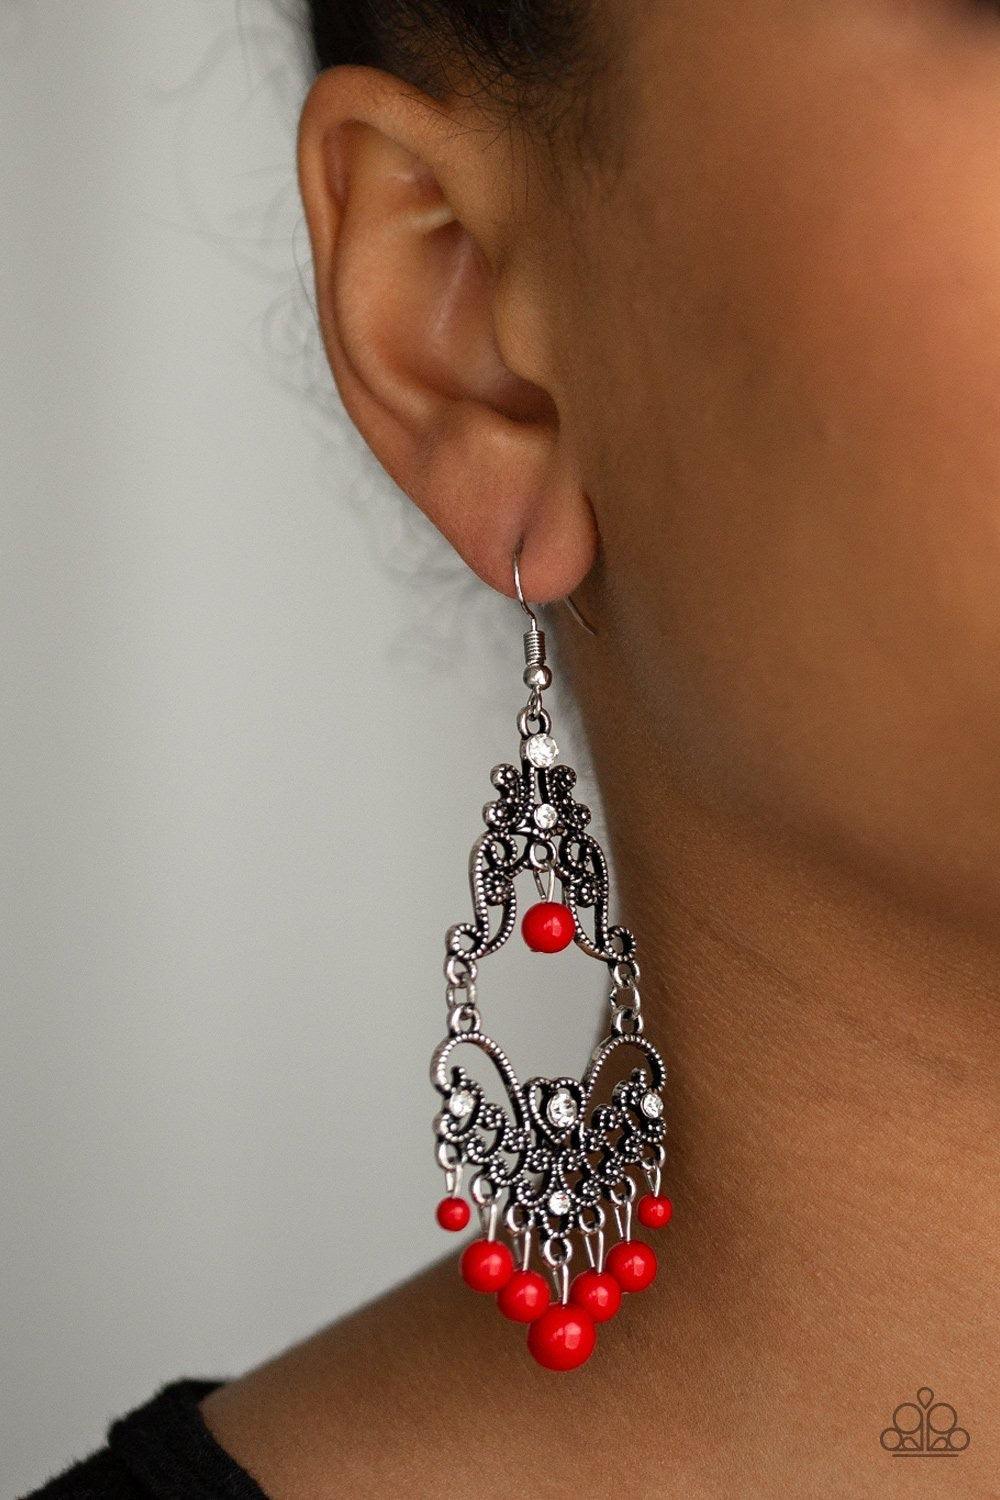 Paparazzi Accessories Colorfully Cabaret - Red Infused with hints of glittery white rhinestones, dotted silver filigree swirls into a decorative frame. Polished red beads swing from the bottom and top of the ornate frame, adding colorful movement to the w